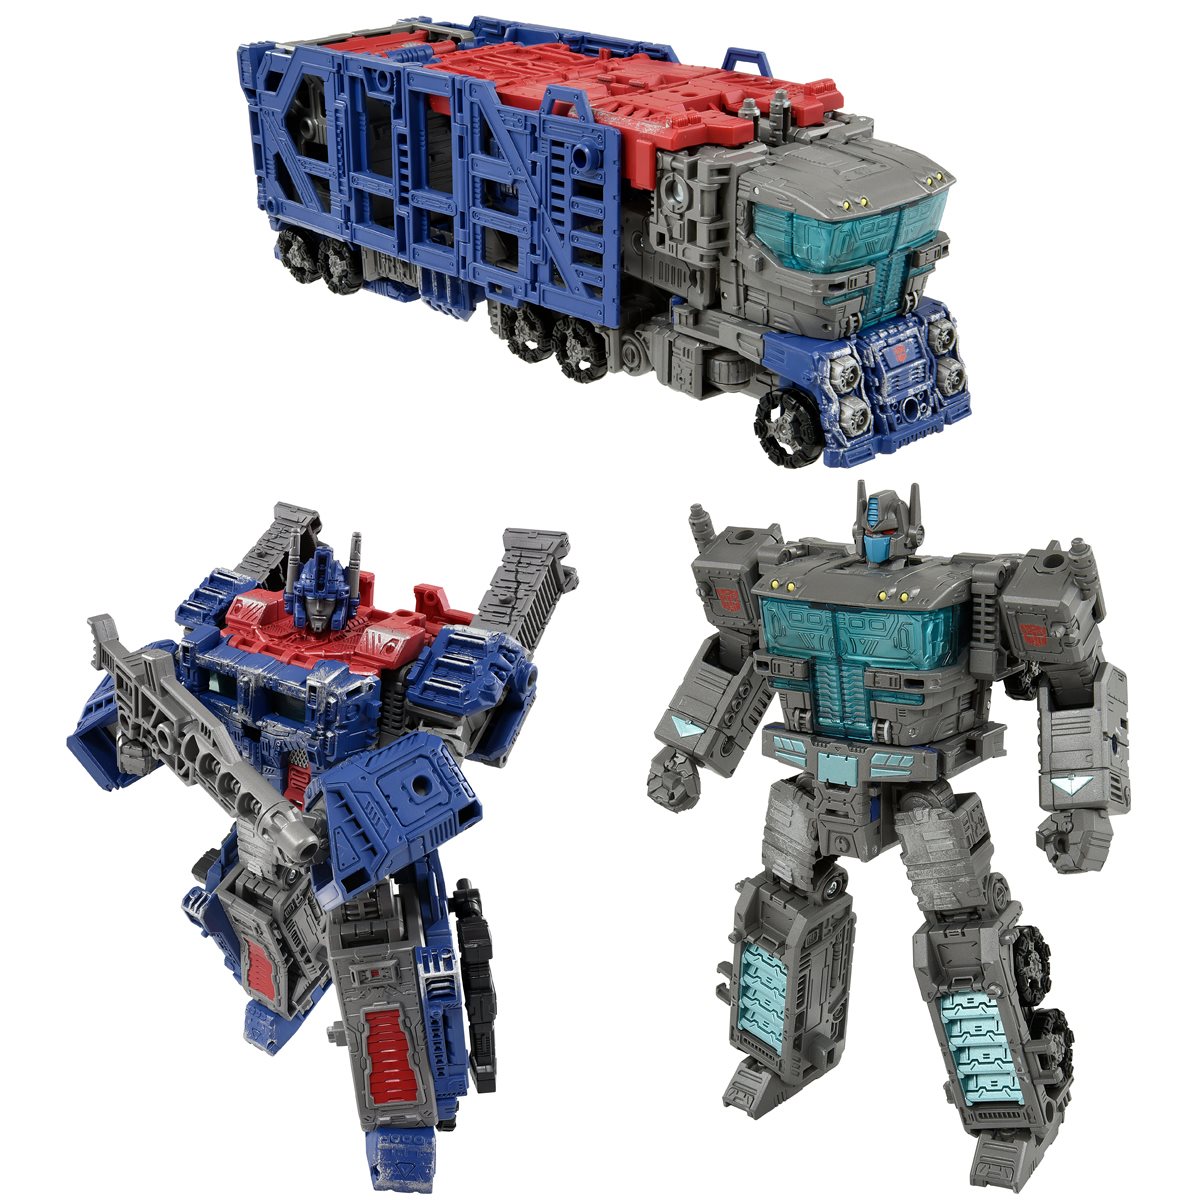 Transformers Premium Finish War for Cybertron WFC-03 Leader Ultra Magnus Action Figure Toy